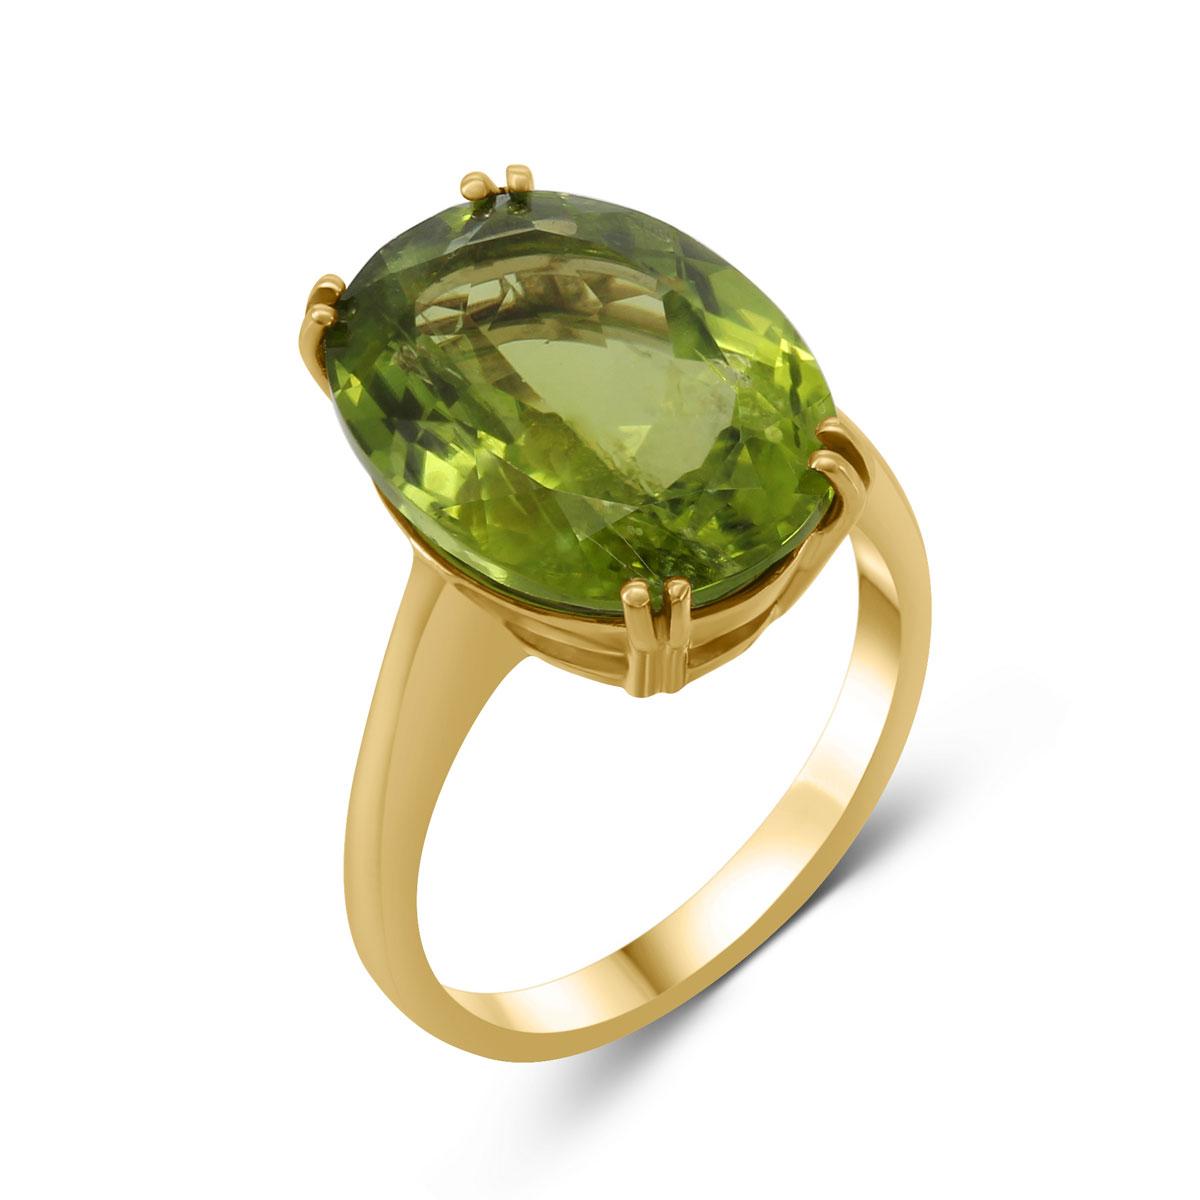 18 kt Gelbgold Ring mit Peridot – “Candy Rings”